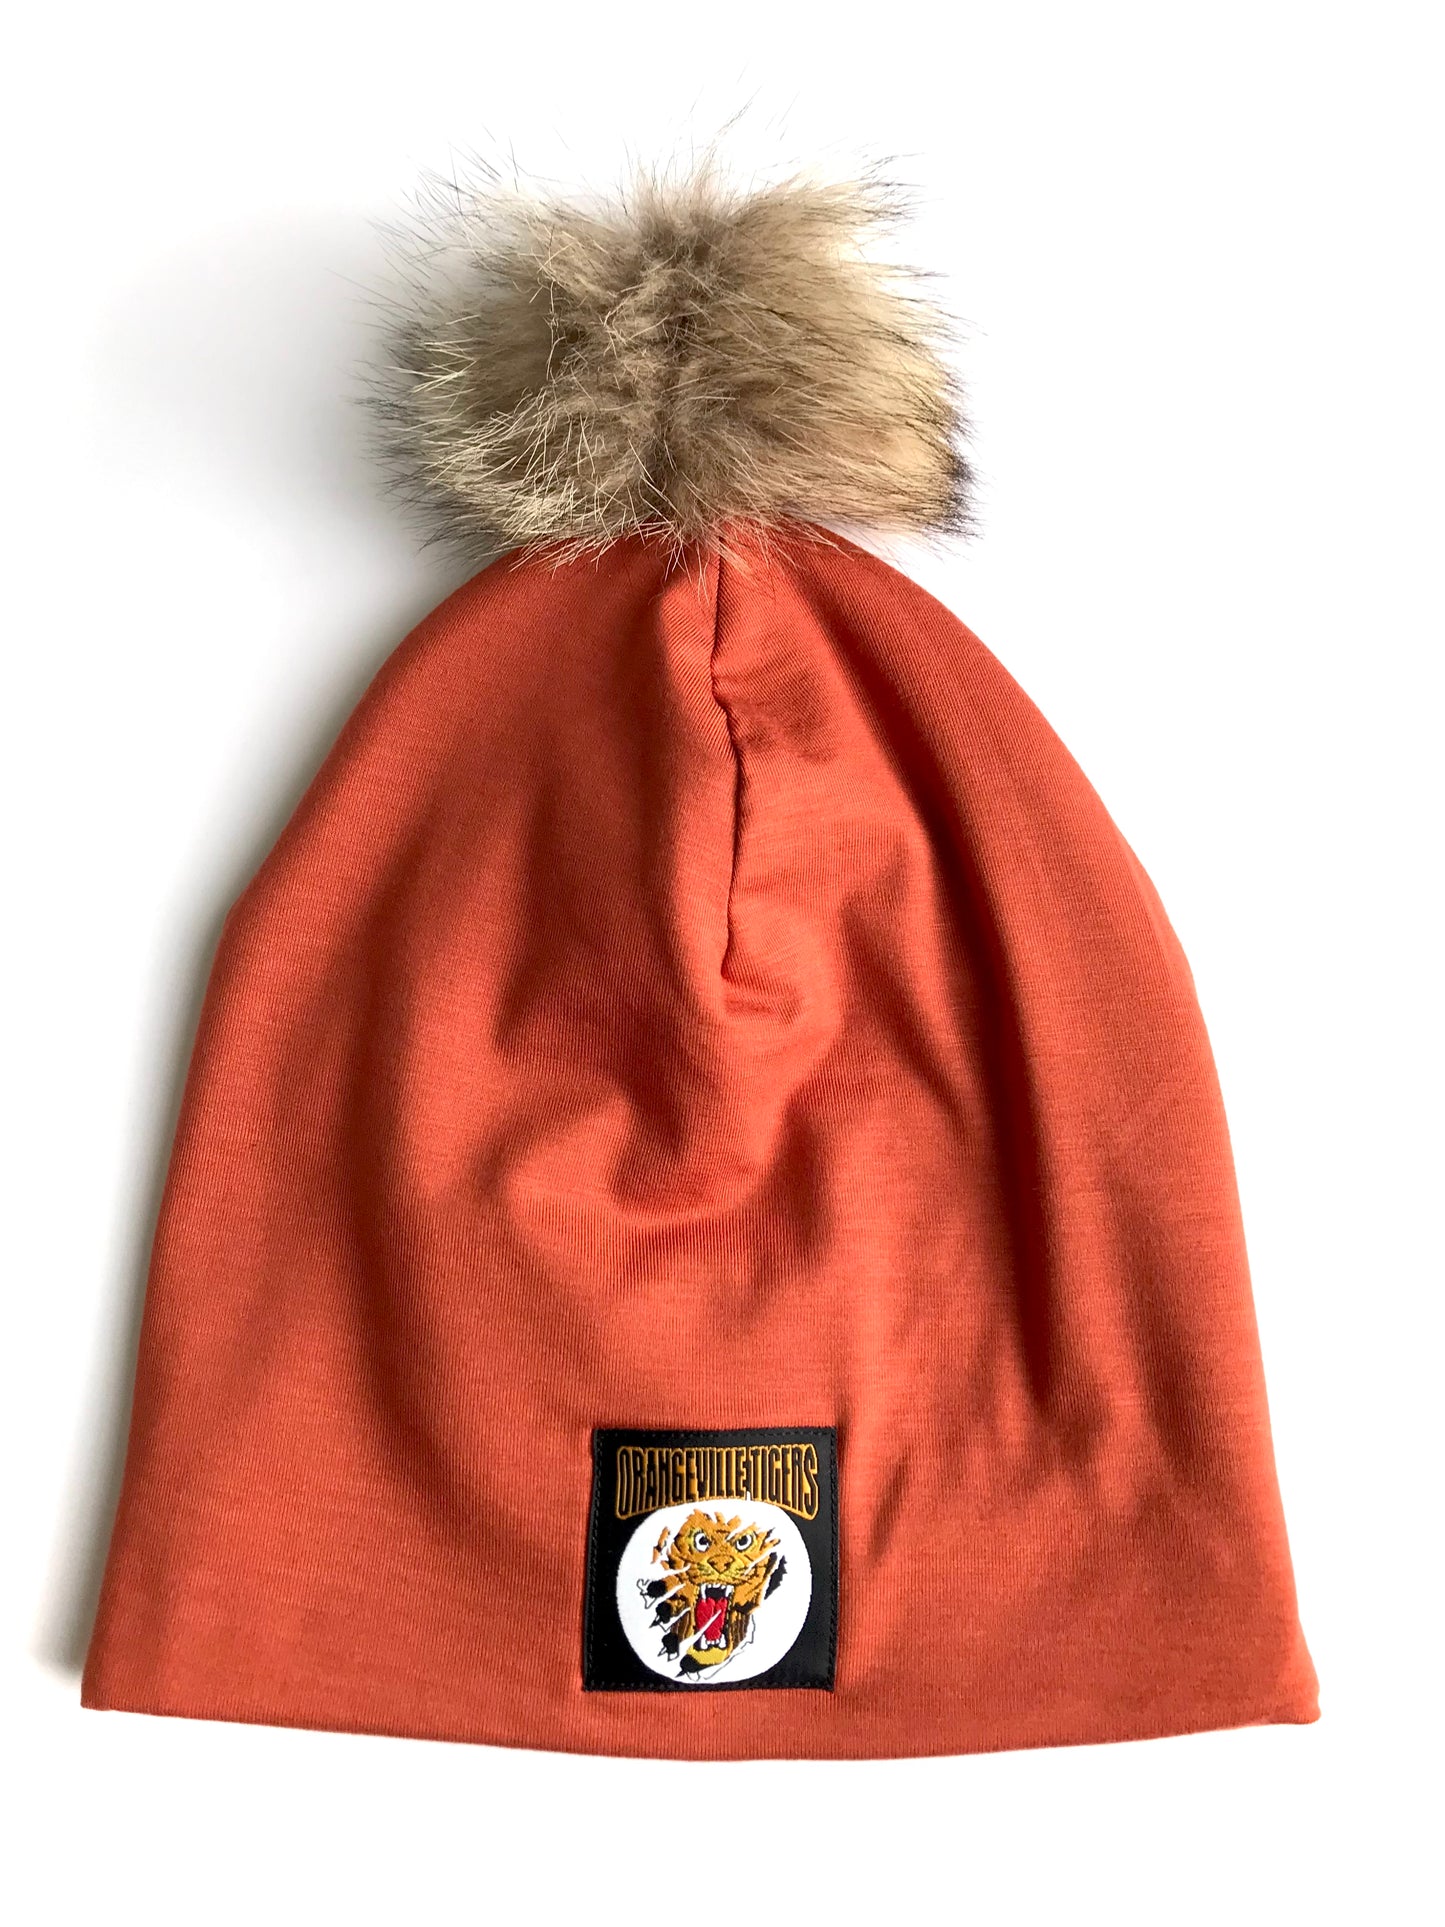 Orangeville Tigers Winter Bamboo Hats with recycled fur pompom